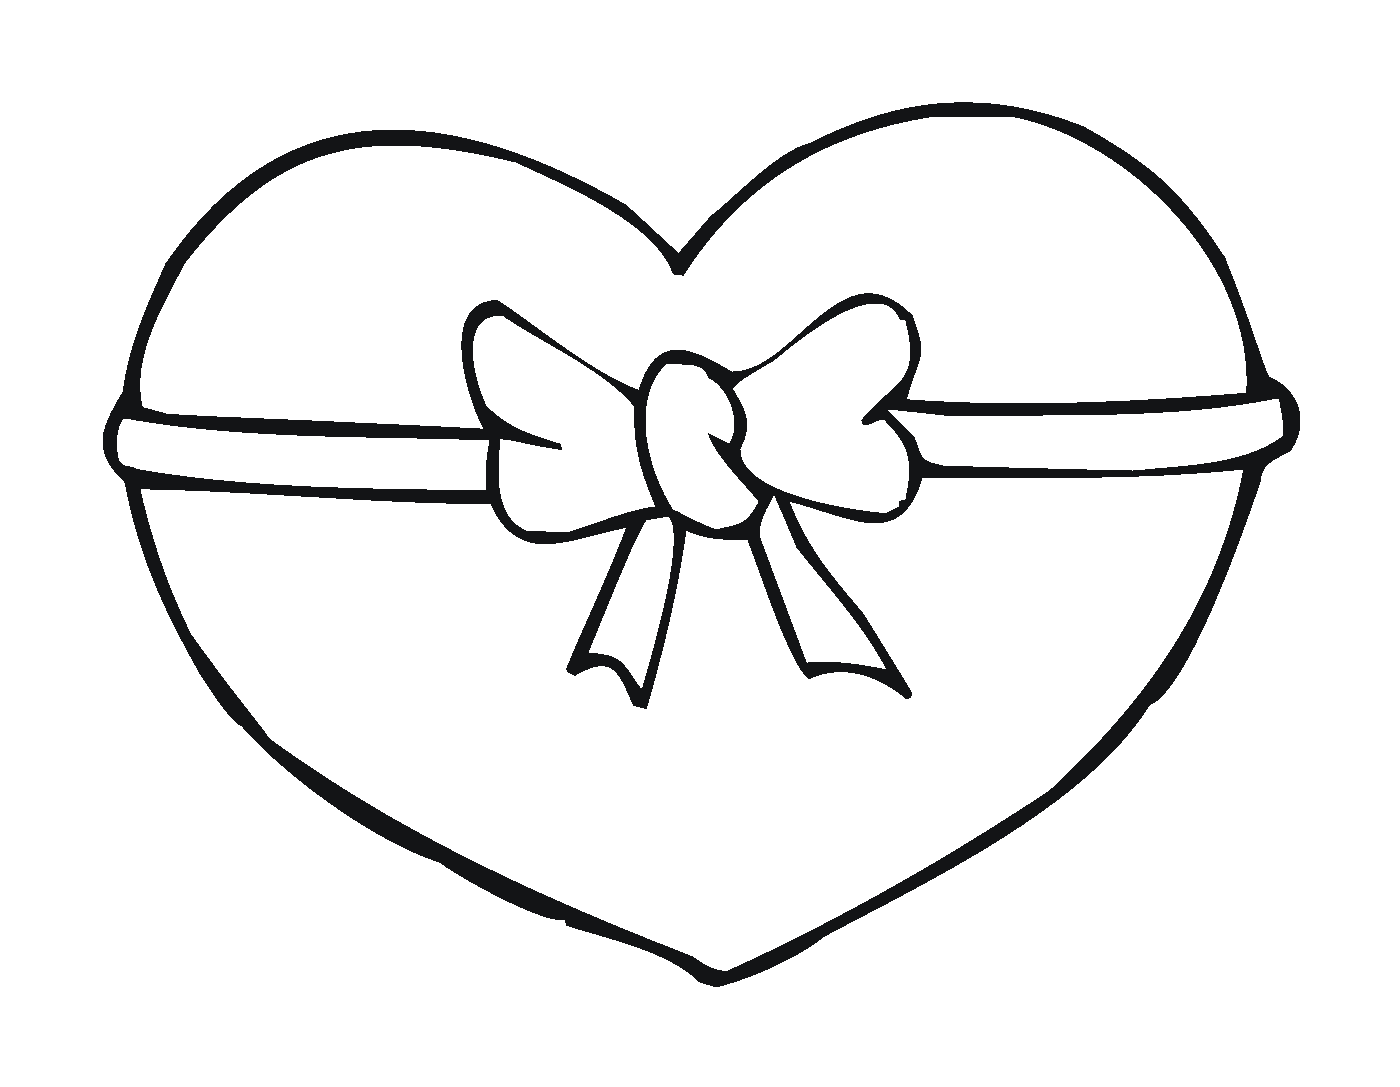  A heart with a knot 